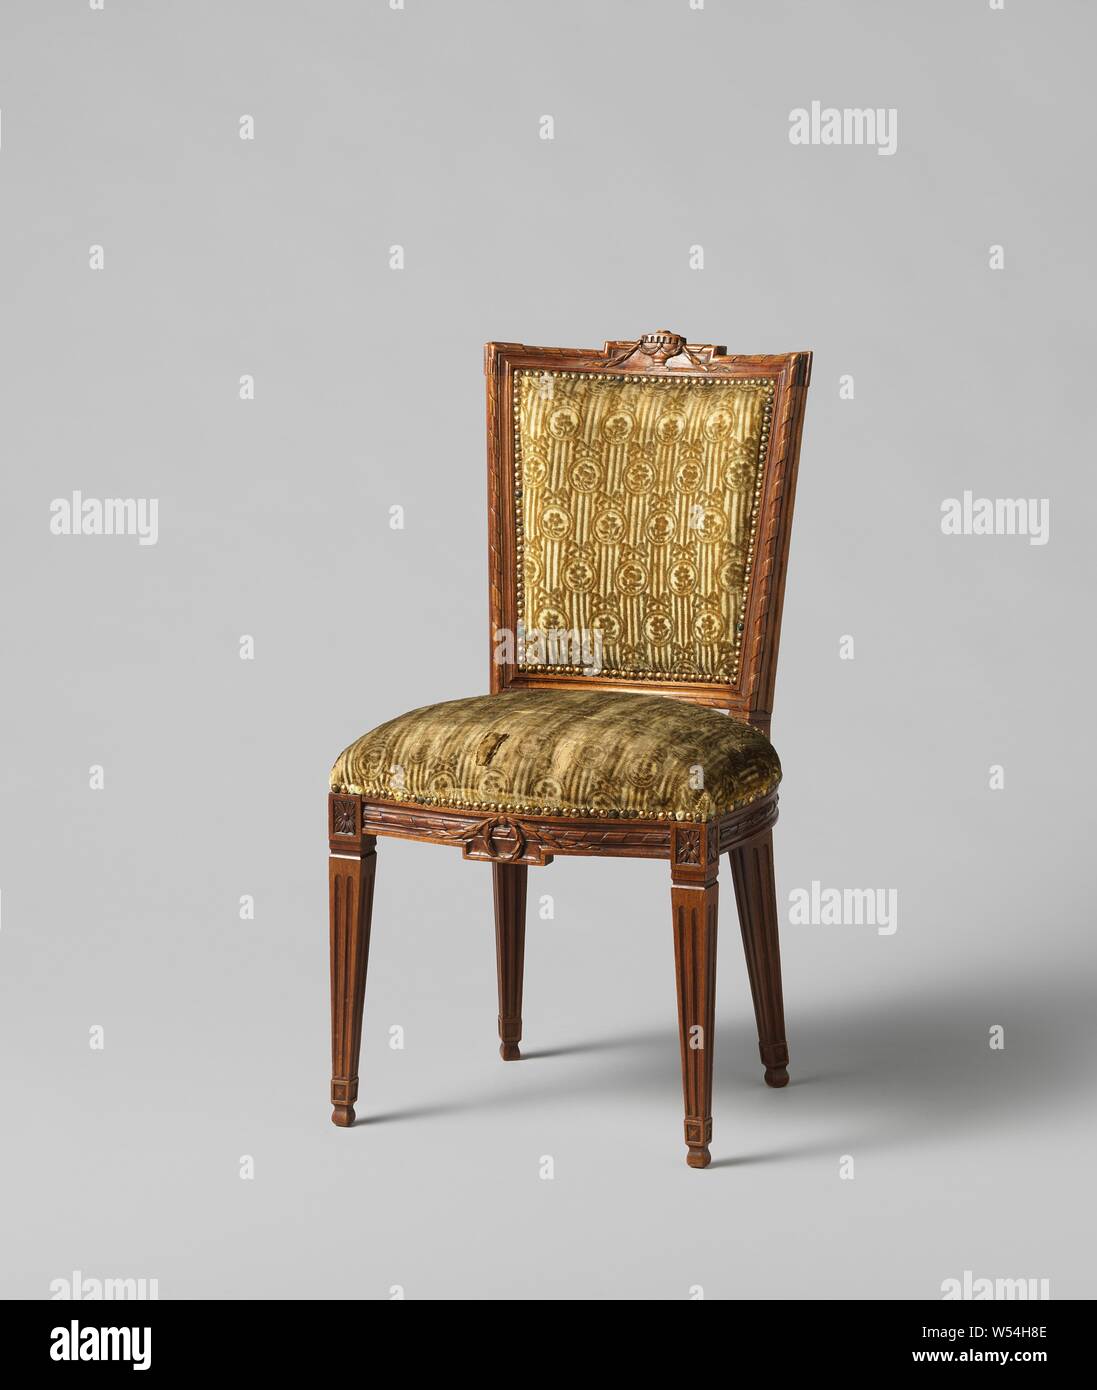 Chair of mahogany, covered with a string with a continuous pattern of oval-shaped hanging oval flowers with a stripe pattern, covered with a continuous pattern of oval-shaped hanging oval with a small flower on a striped stripe ground. The square legs are fluted. The front line is decorated in the middle with a laurel wreath and a pendulum. The back frame is parallelogram-shaped and concave. The upper threshold is decorated with a stabbed vase and laurel garland. The cover is attached with nails with gold-plated heads. The chair belongs to an ameublement, anonymous, Northern Netherlands, 1775 Stock Photo